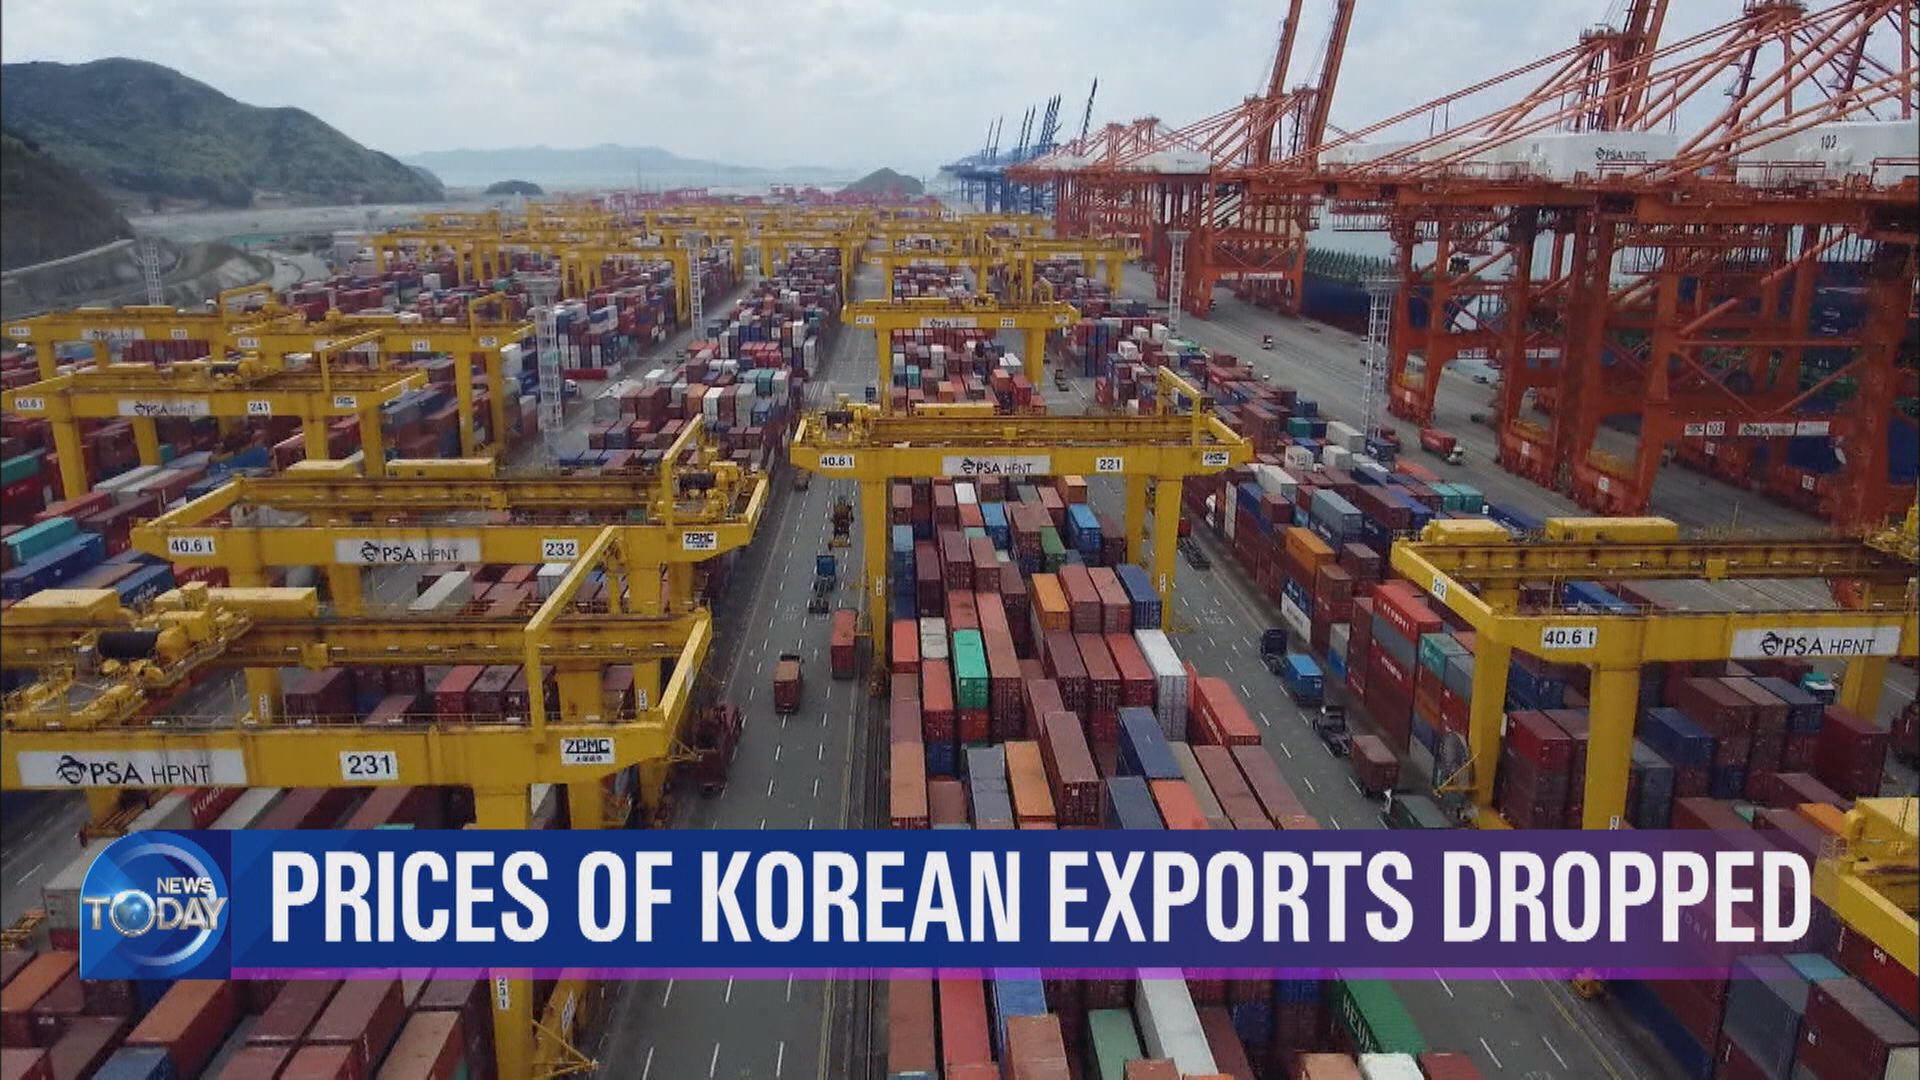 PRICES OF KOREAN EXPORTS DROPPED